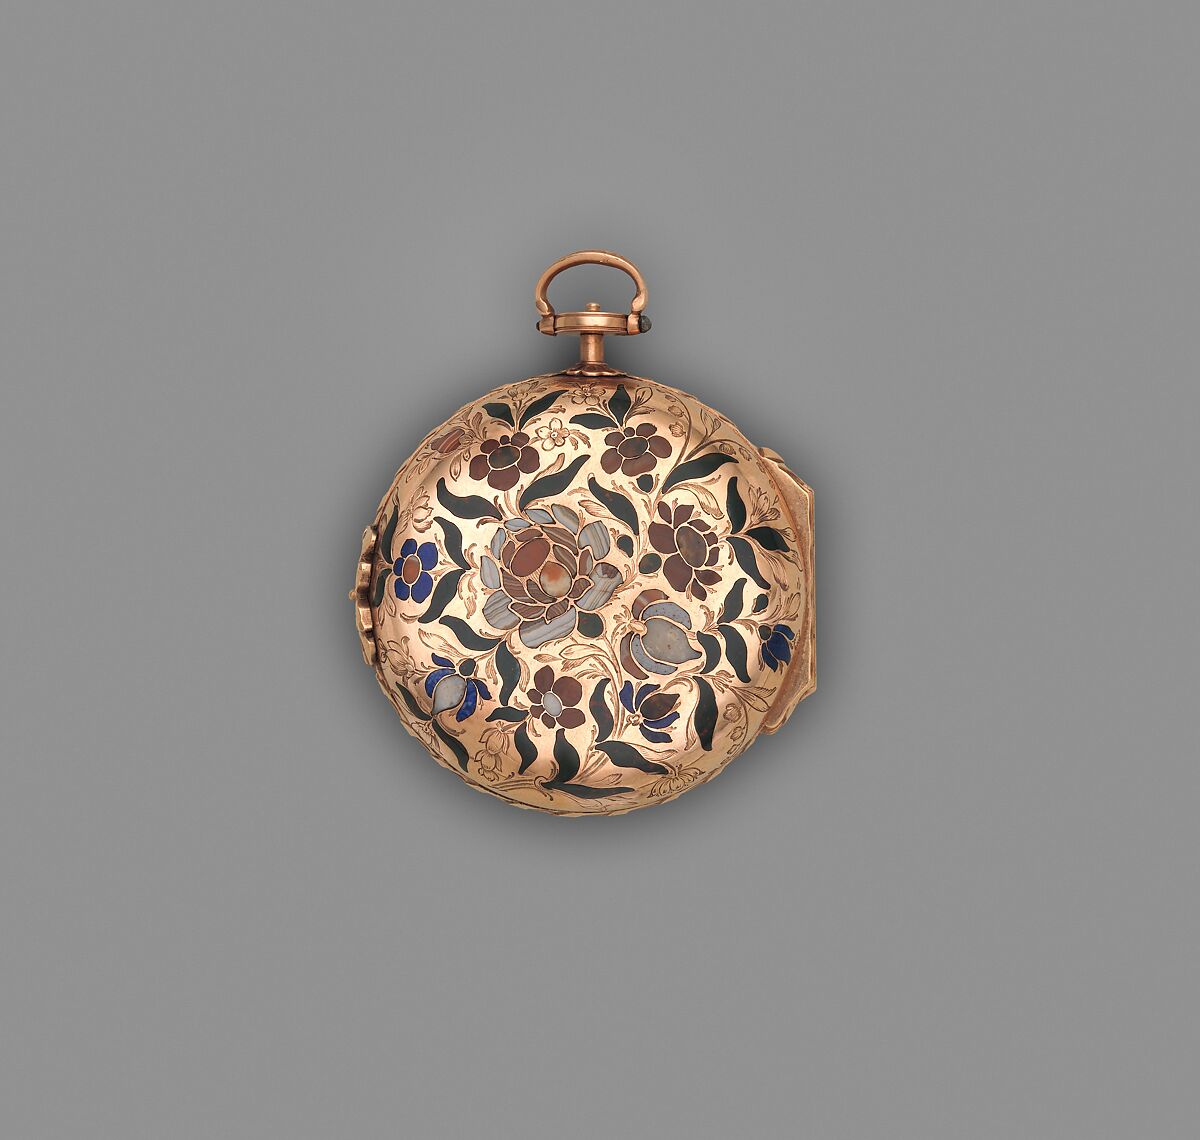 Watch, Case maker: Attributed to Christian Gottlieb Stiehl (German, 1708–1792), Case: gold, inlaid with hardstones, probably German, Dresden 